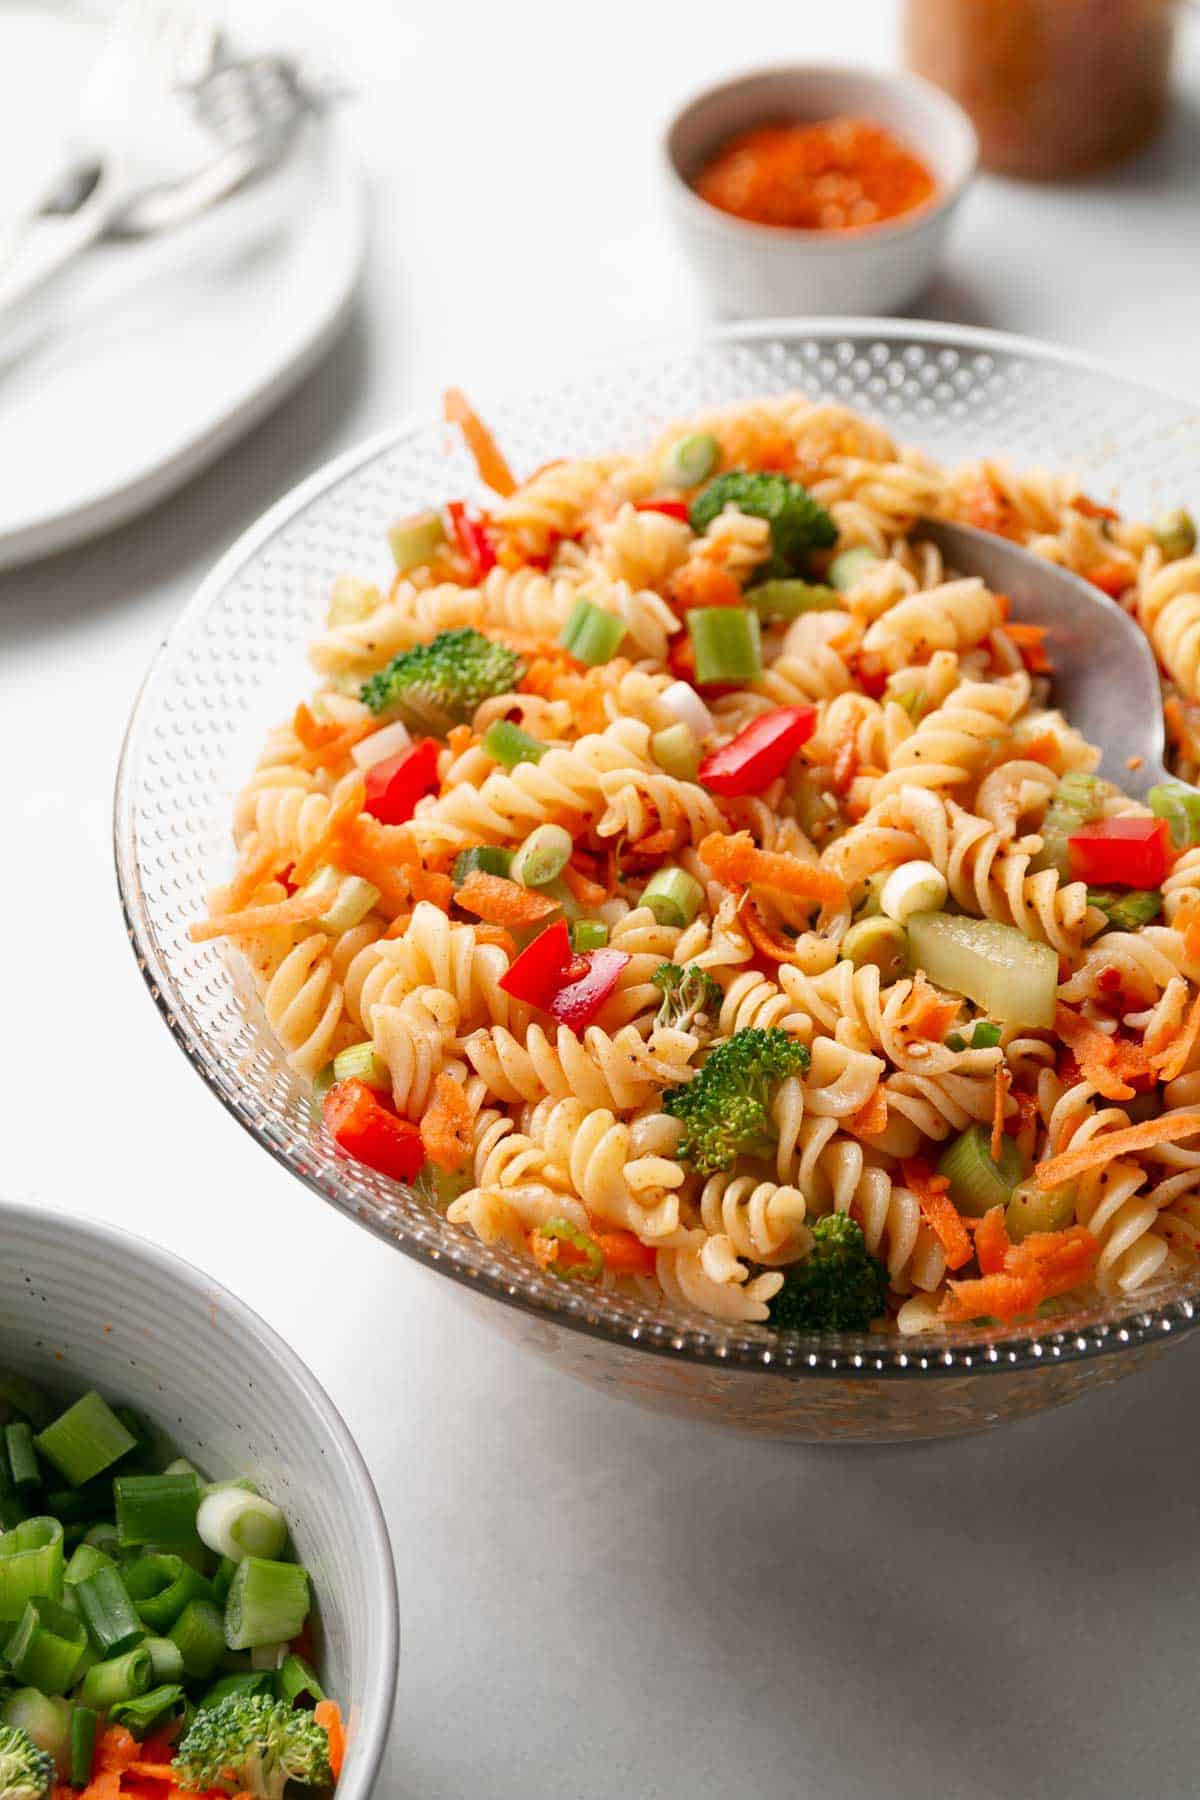 Gluten-free Italian Pasta Salad filled with chopped veggies in a glass bowl.